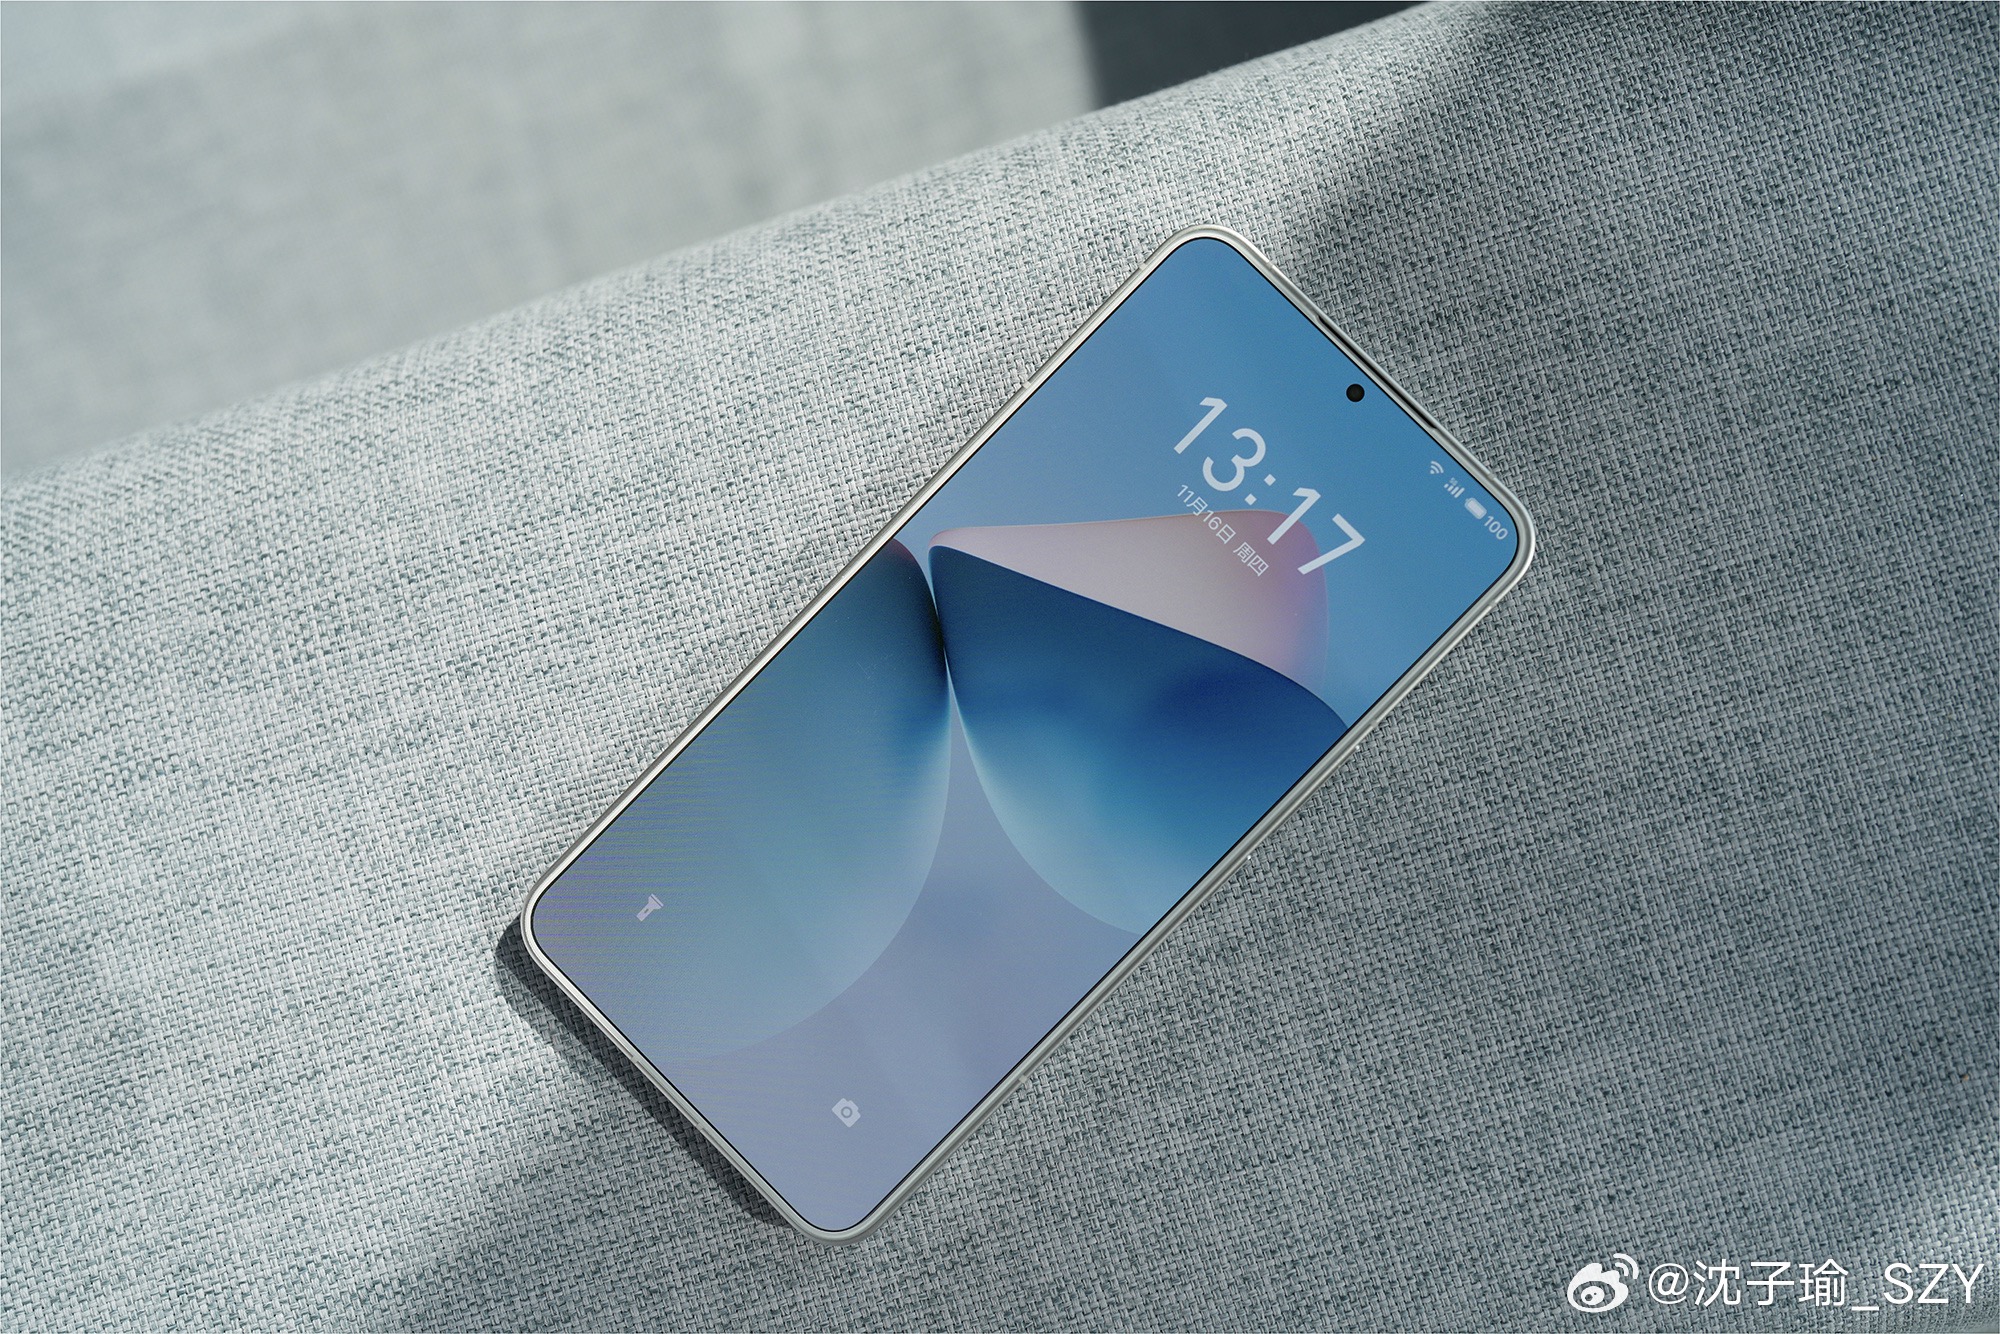 Meizu 21 is released, Meizu strives to break the dilemma with its appearance